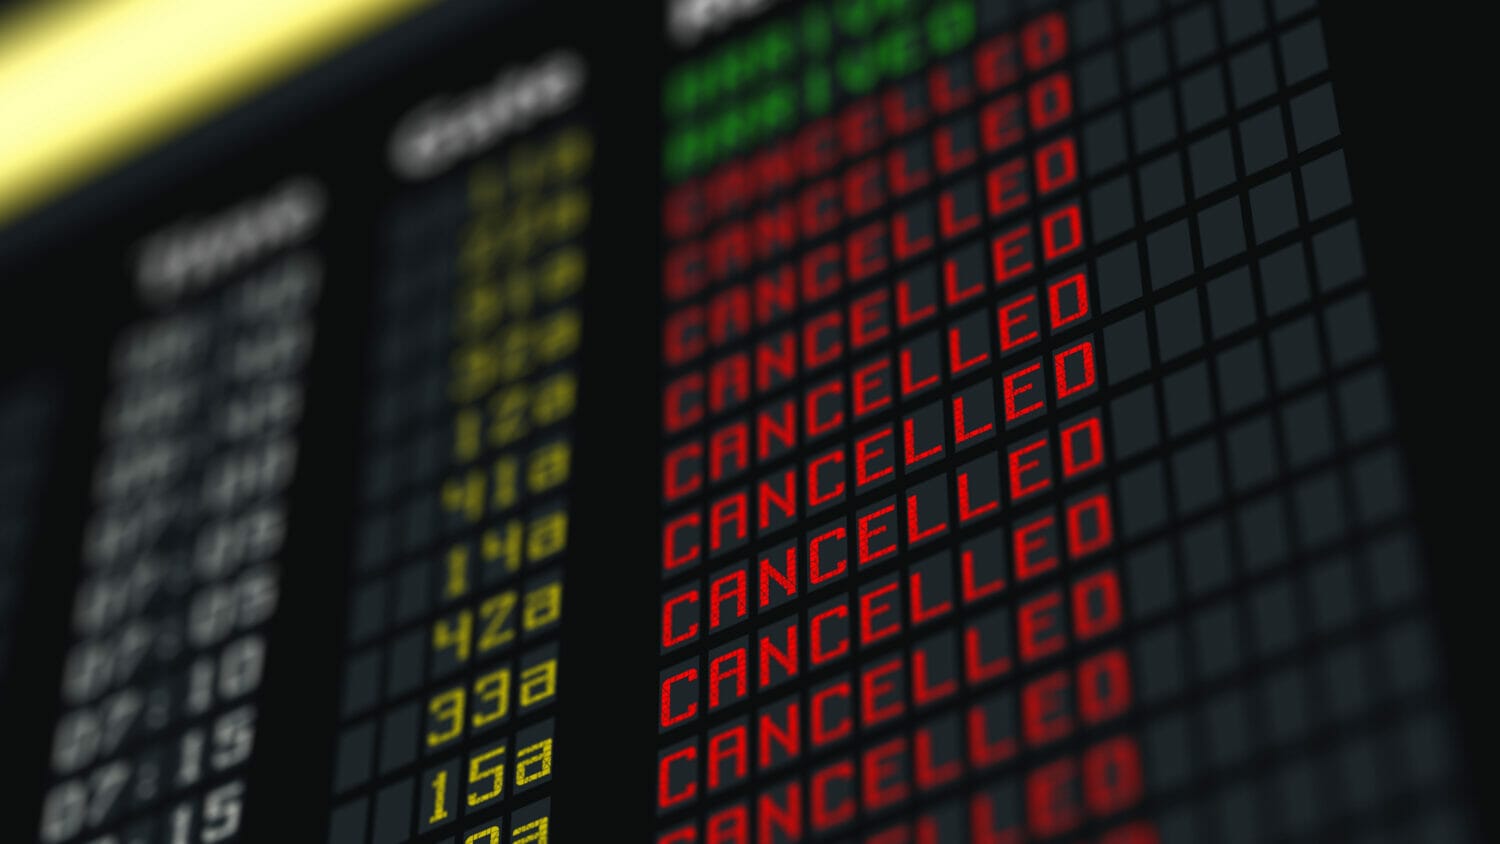 Cancelled flights